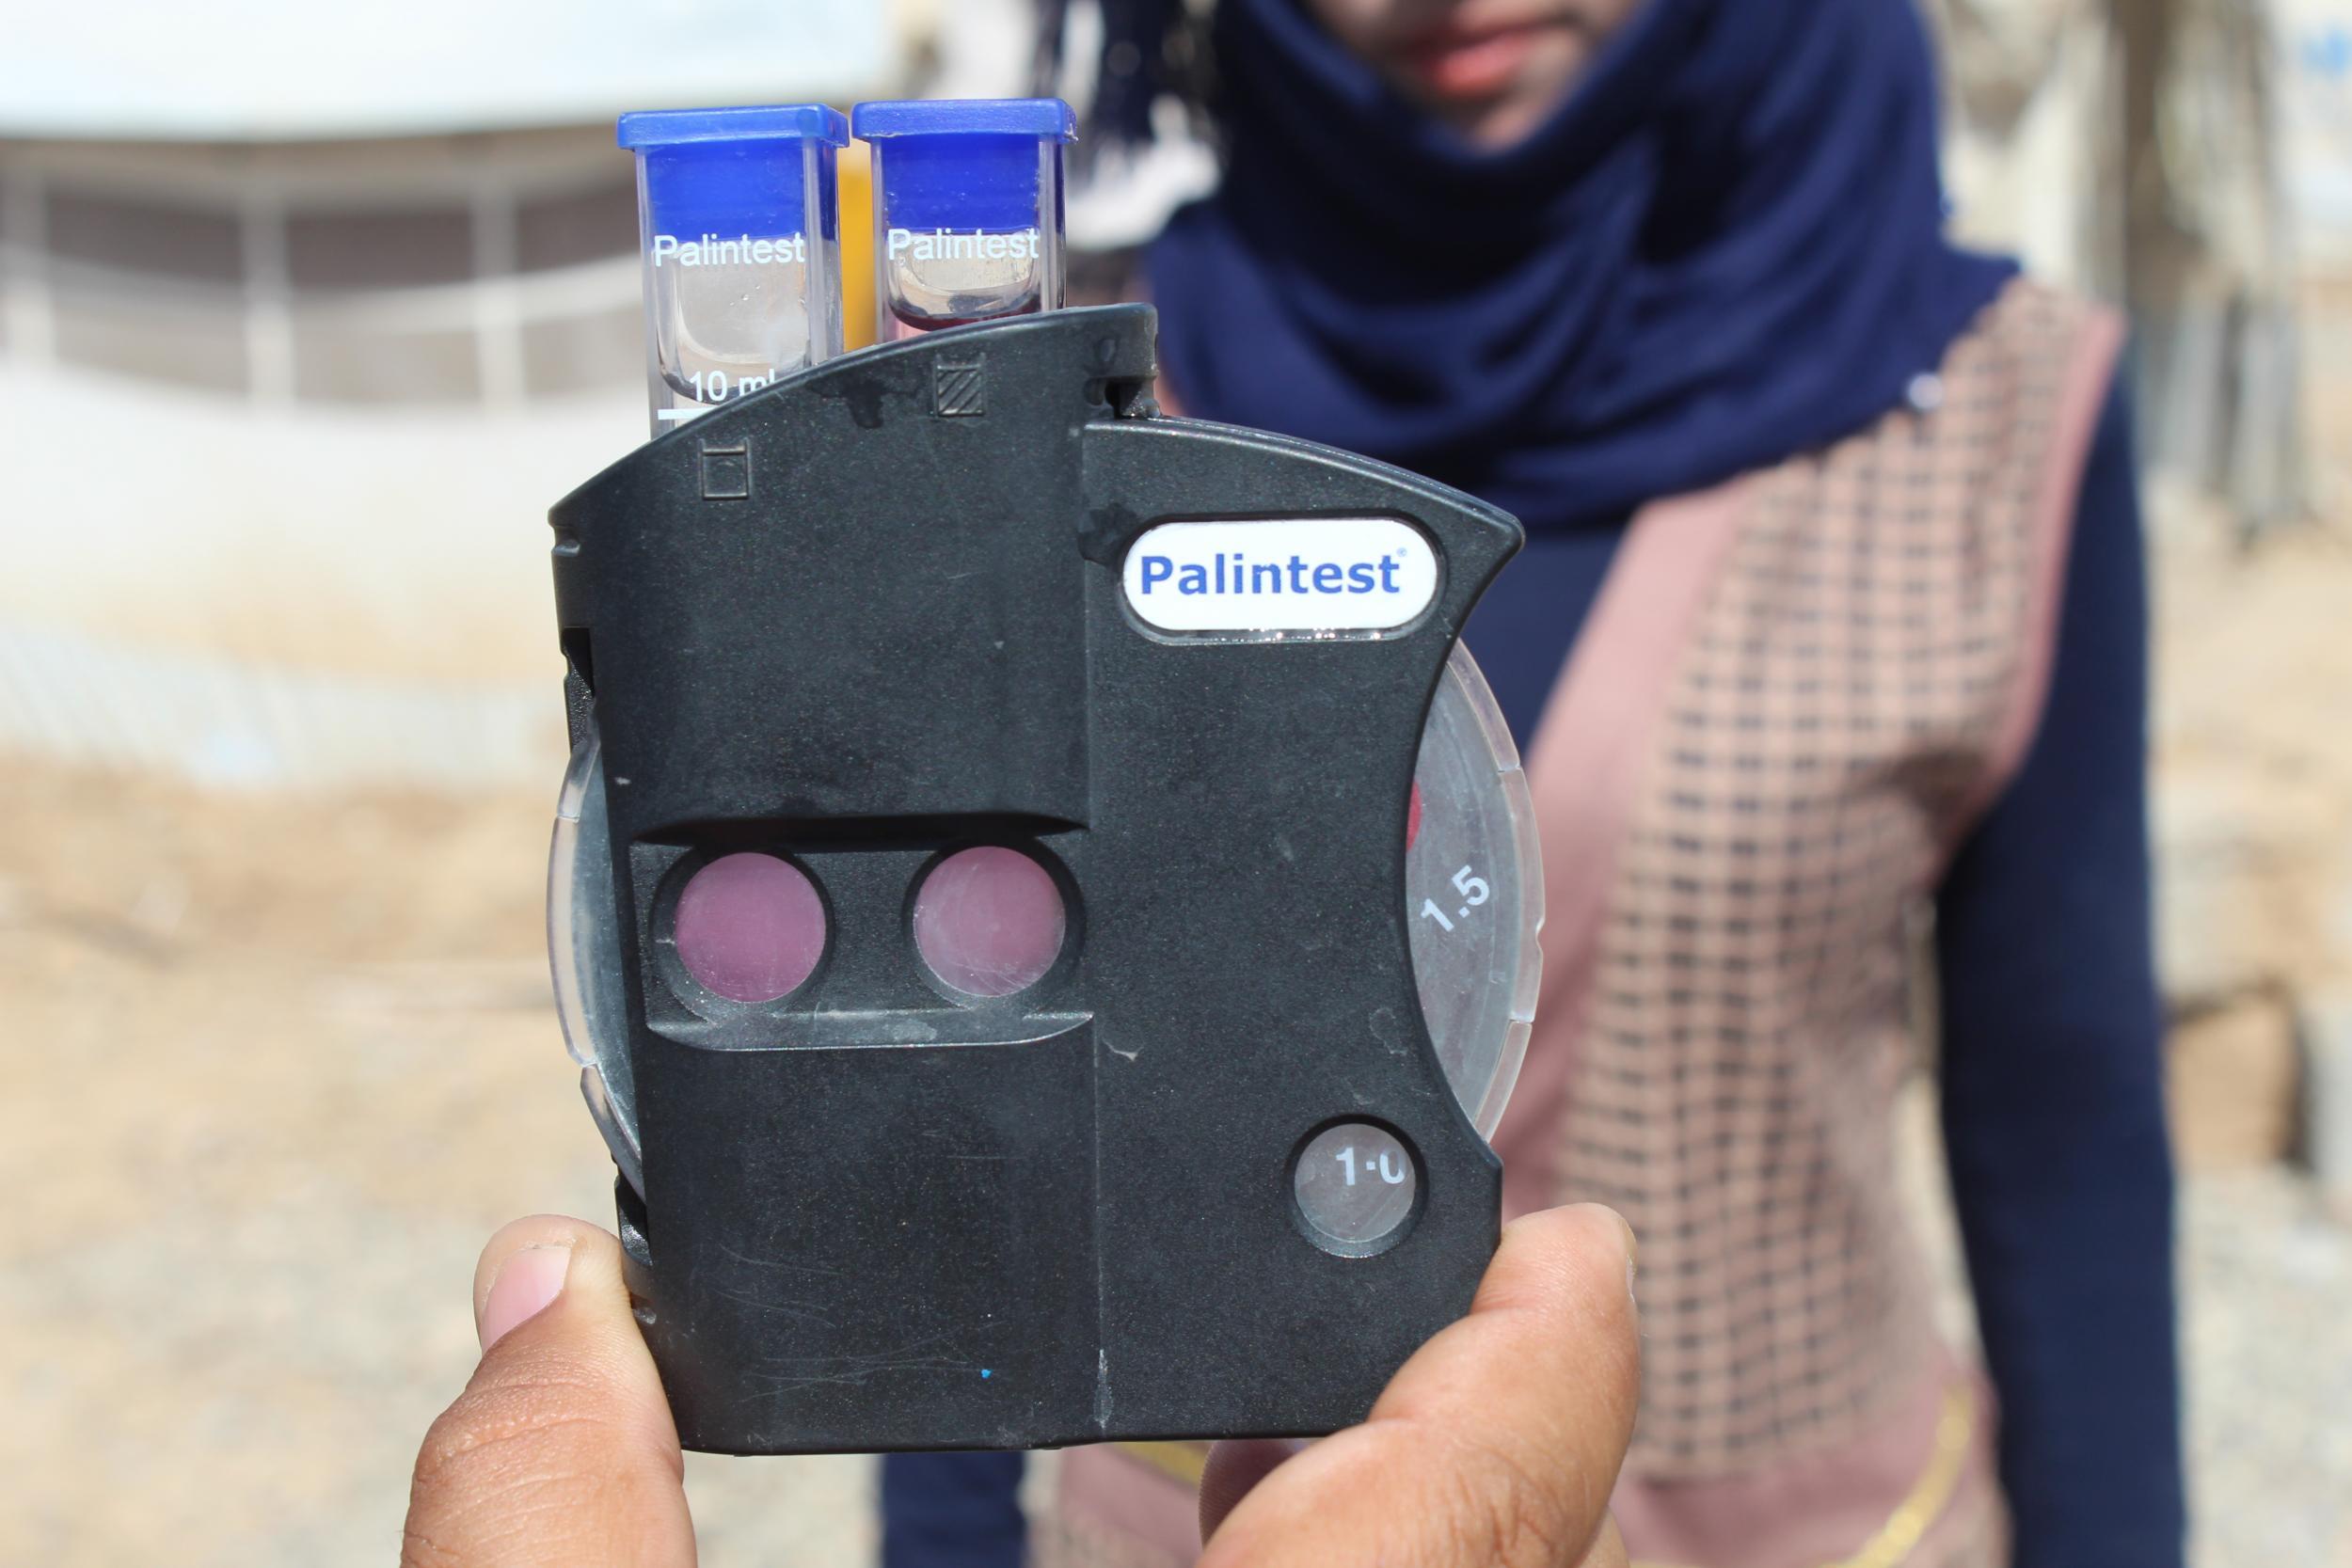 A testing kit used by NGO Wash (Water, hygience and sanitation) teams in which samples turn purple to double check whether treated water is safe to drink